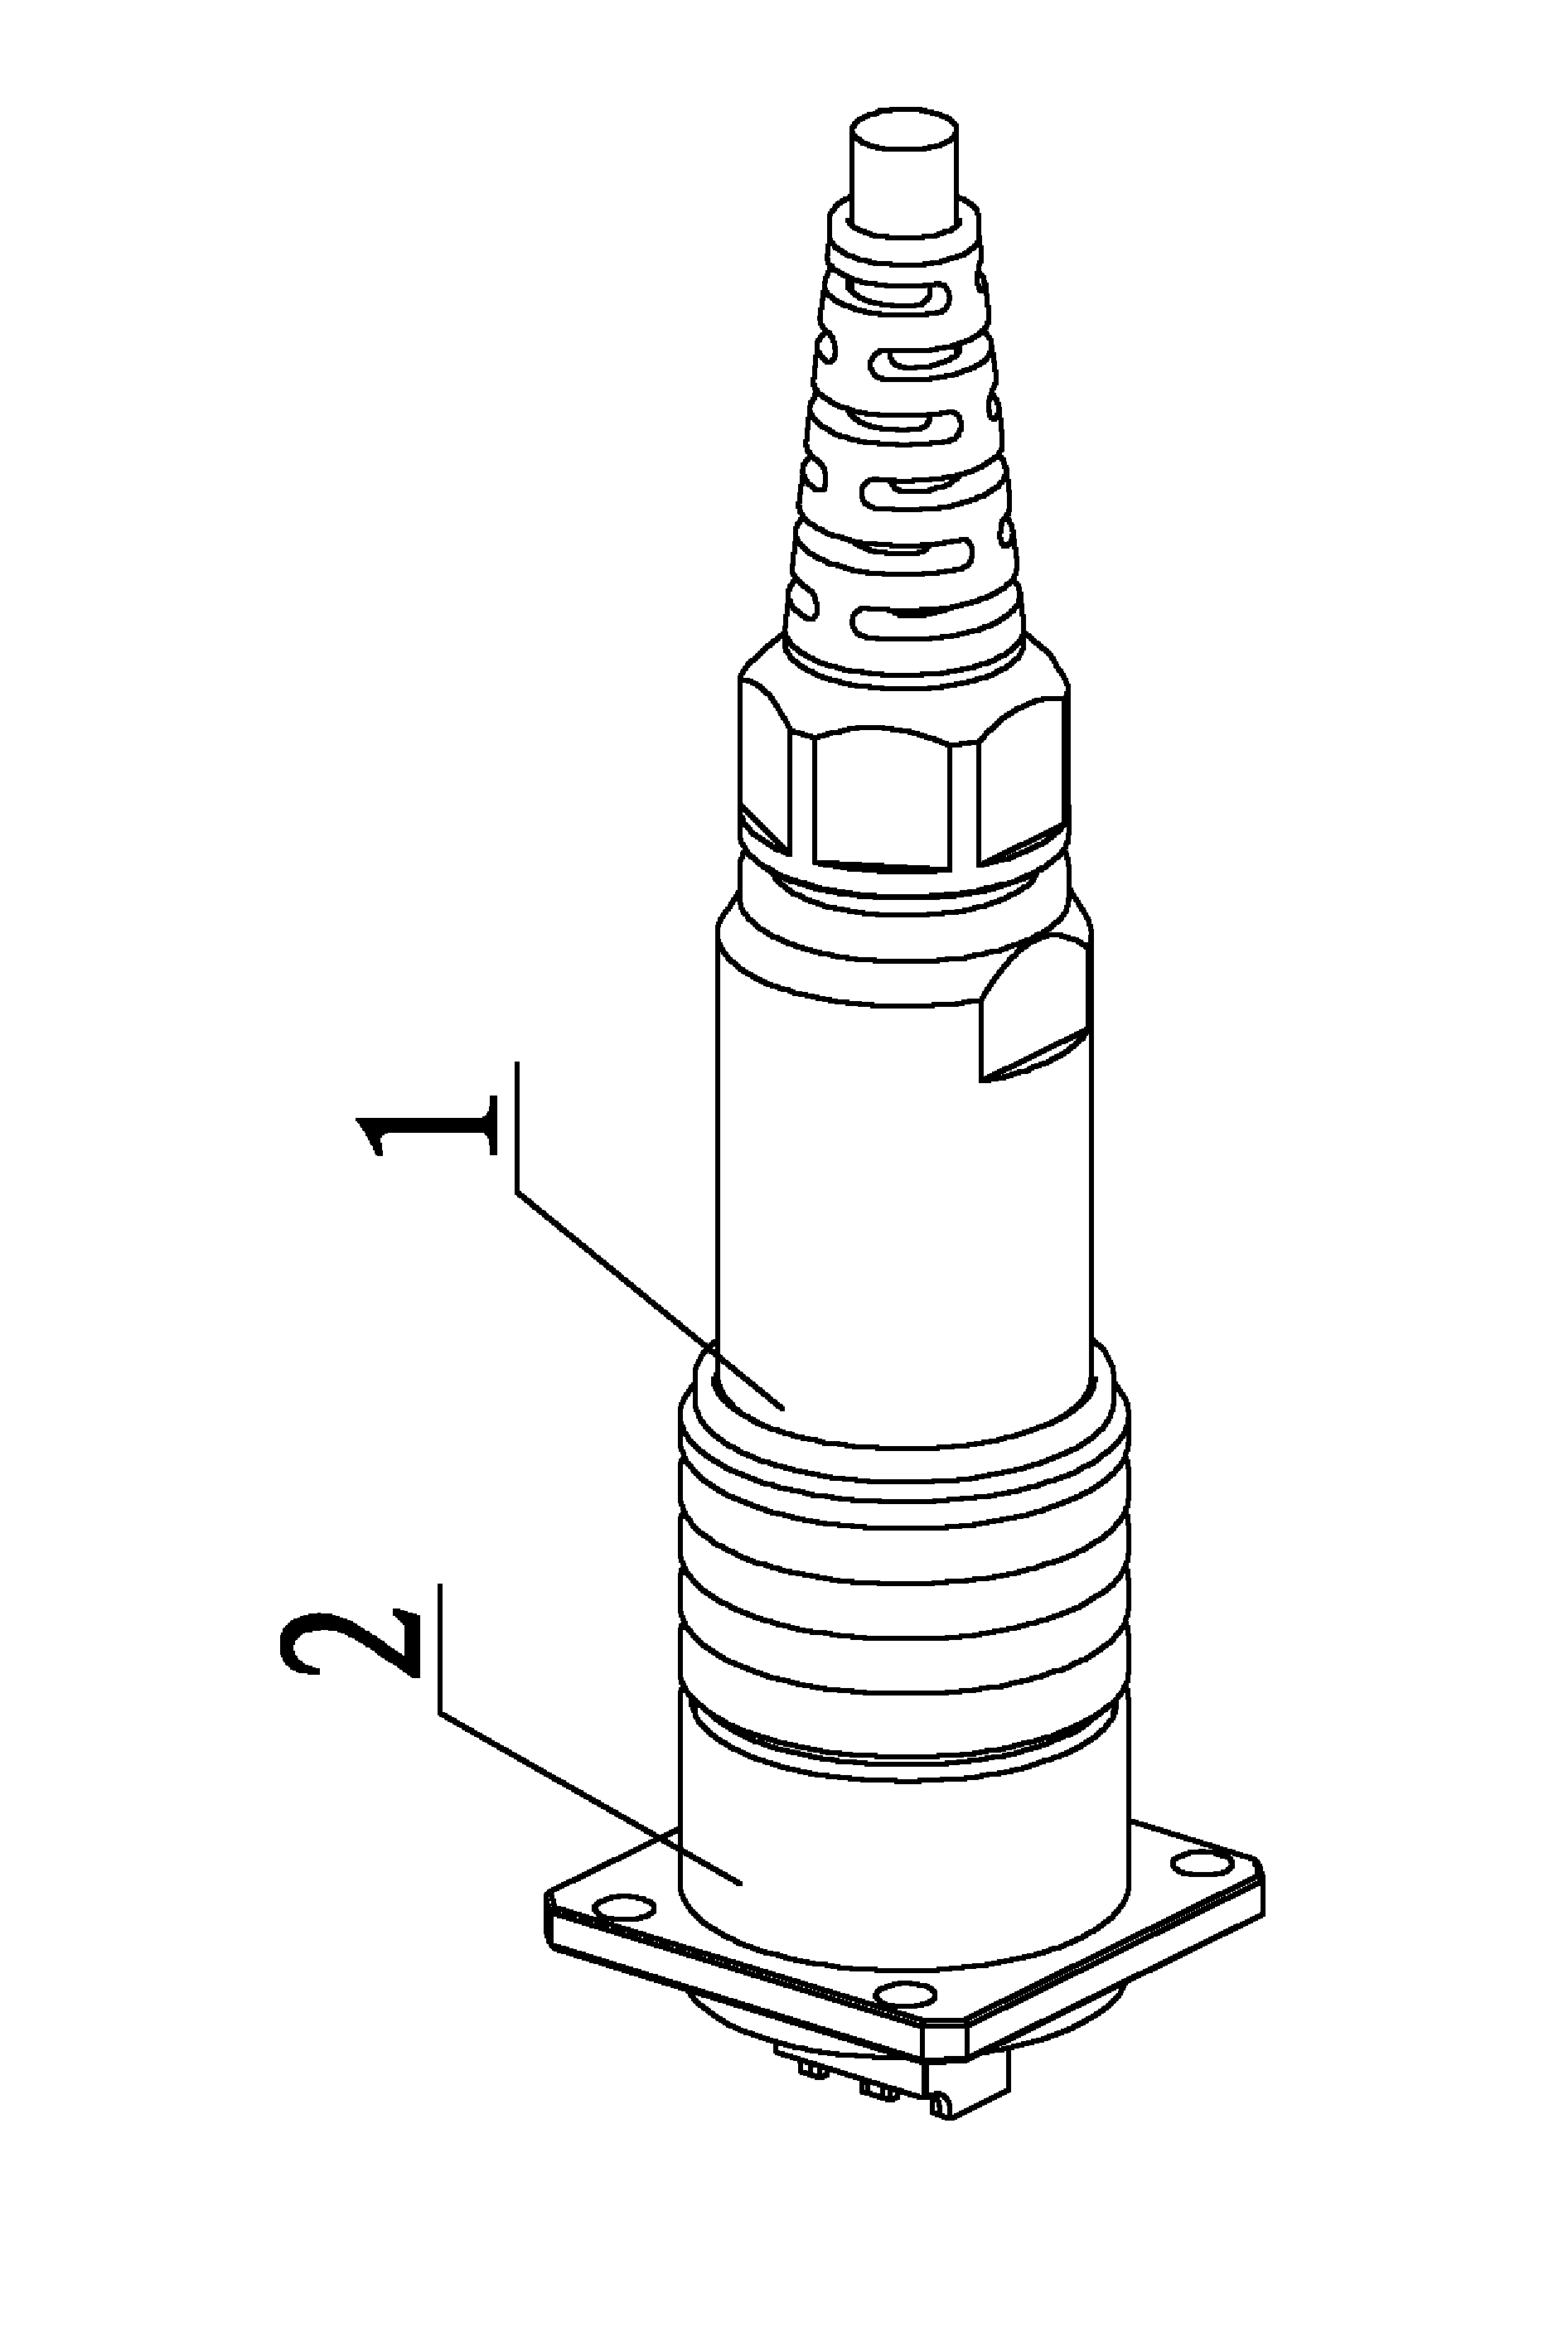 DLC (Data Link Control) optical fiber connector assembly and plug thereof